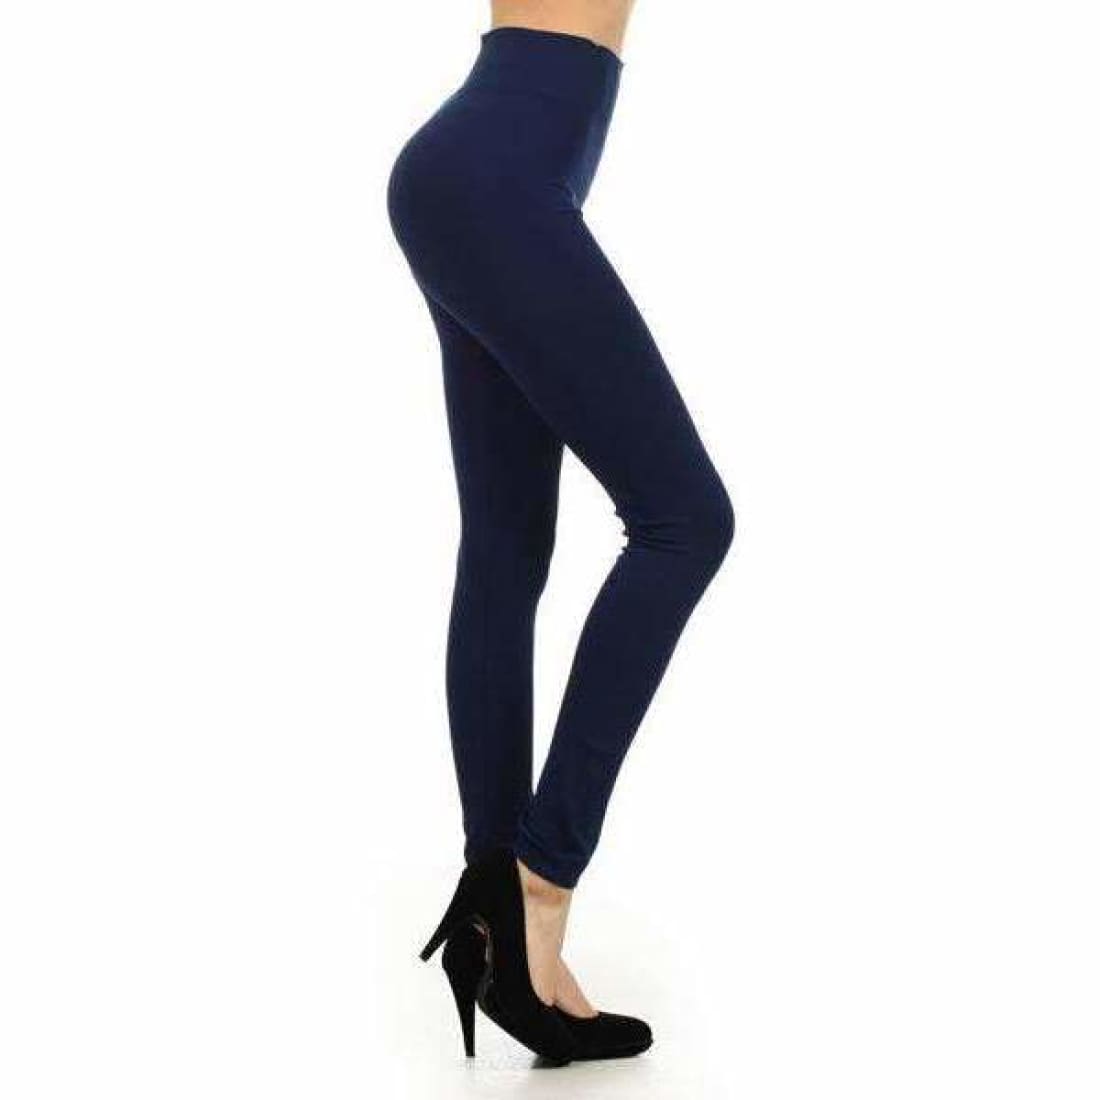 YELETE Women's Active Lace-Up Mesh Side Workout Leggings Navy Blue S